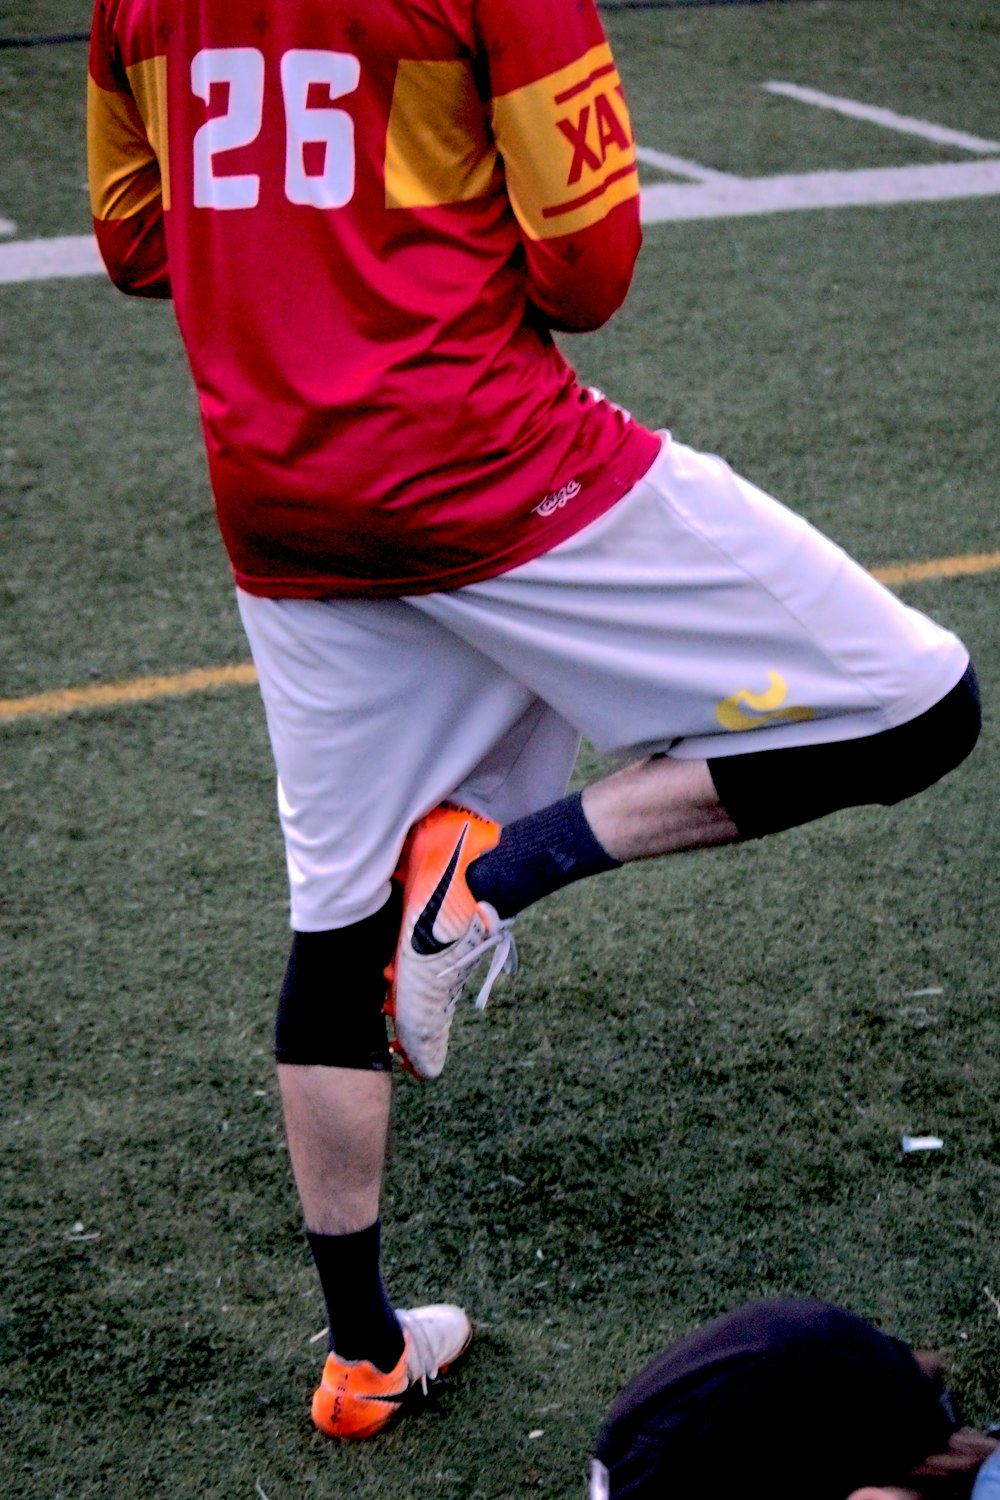 a man in a red and yellow uniform kicking a soccer ball